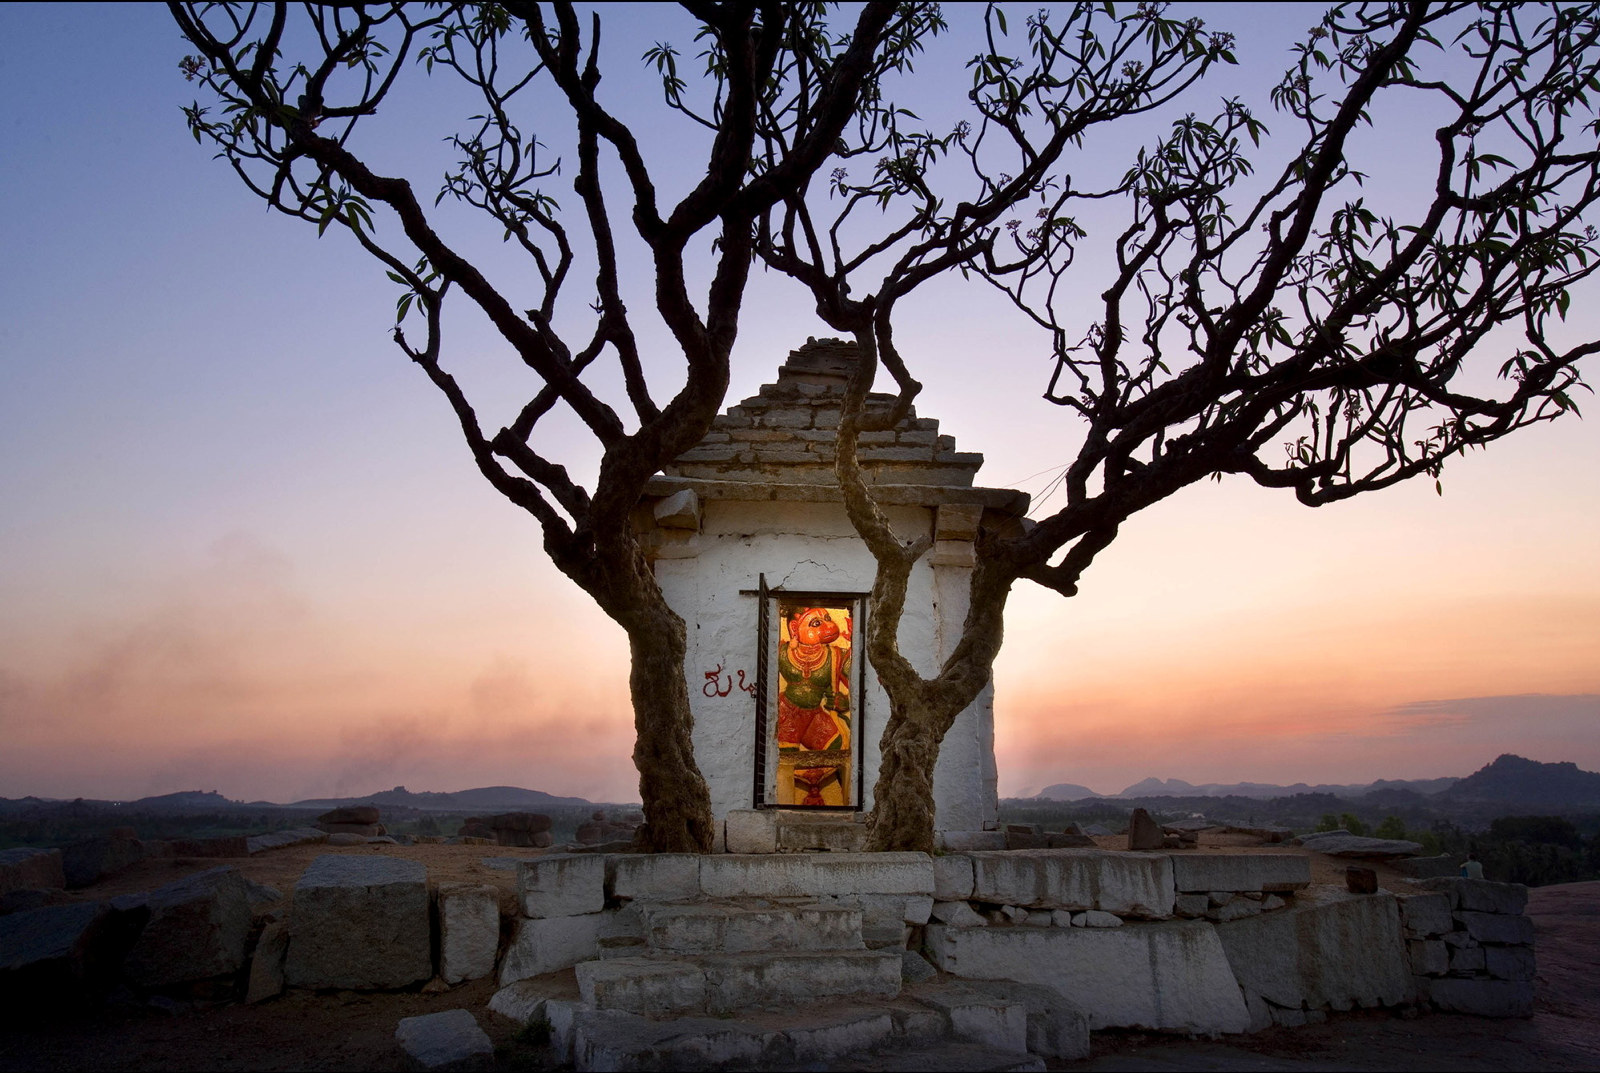 Small structure in tree with sunset behind.